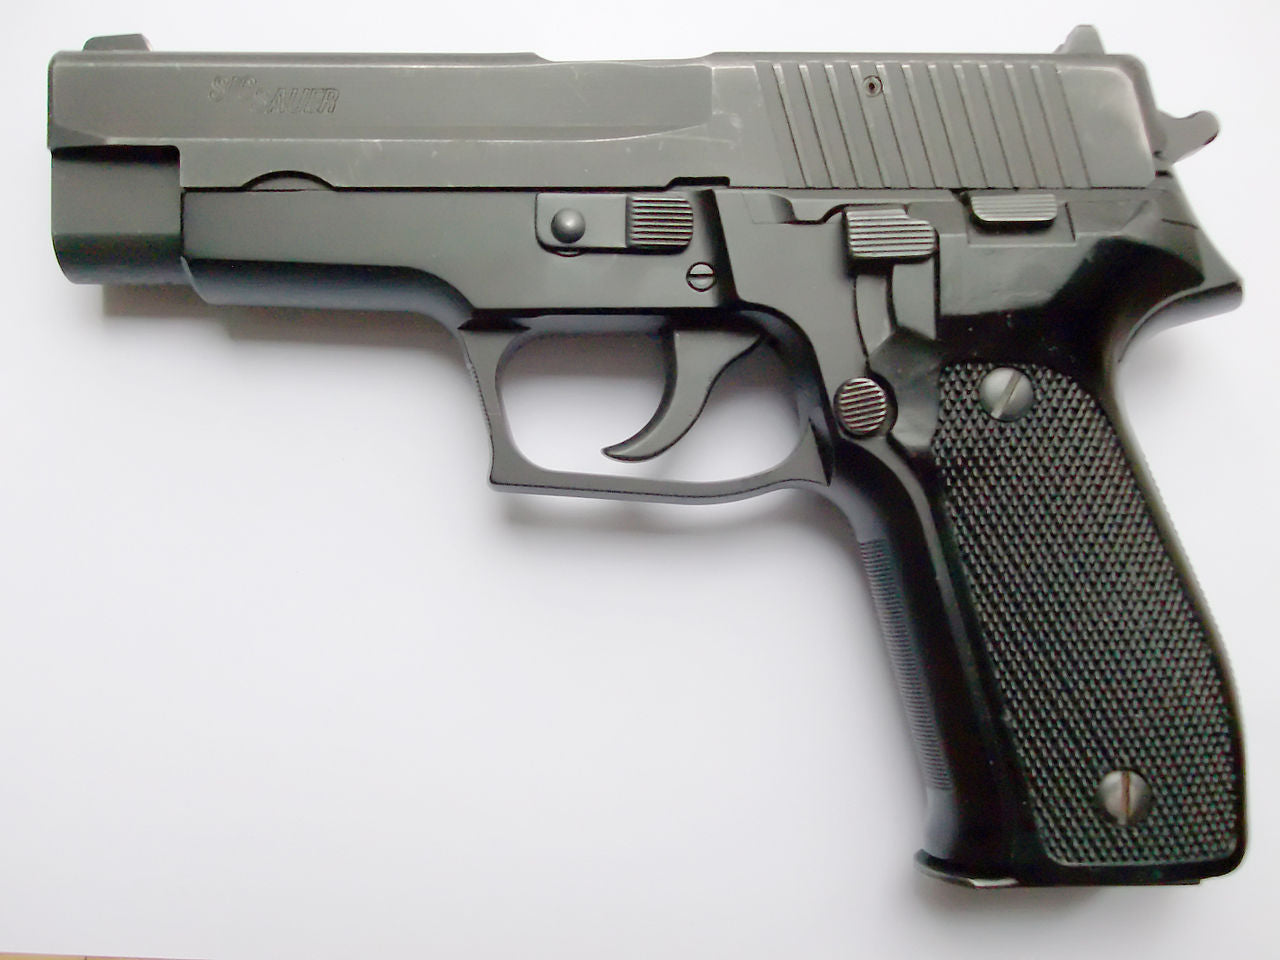 Sig Sauer P226 Gen 2 Review: Pros and cons of the P226 Gen 2